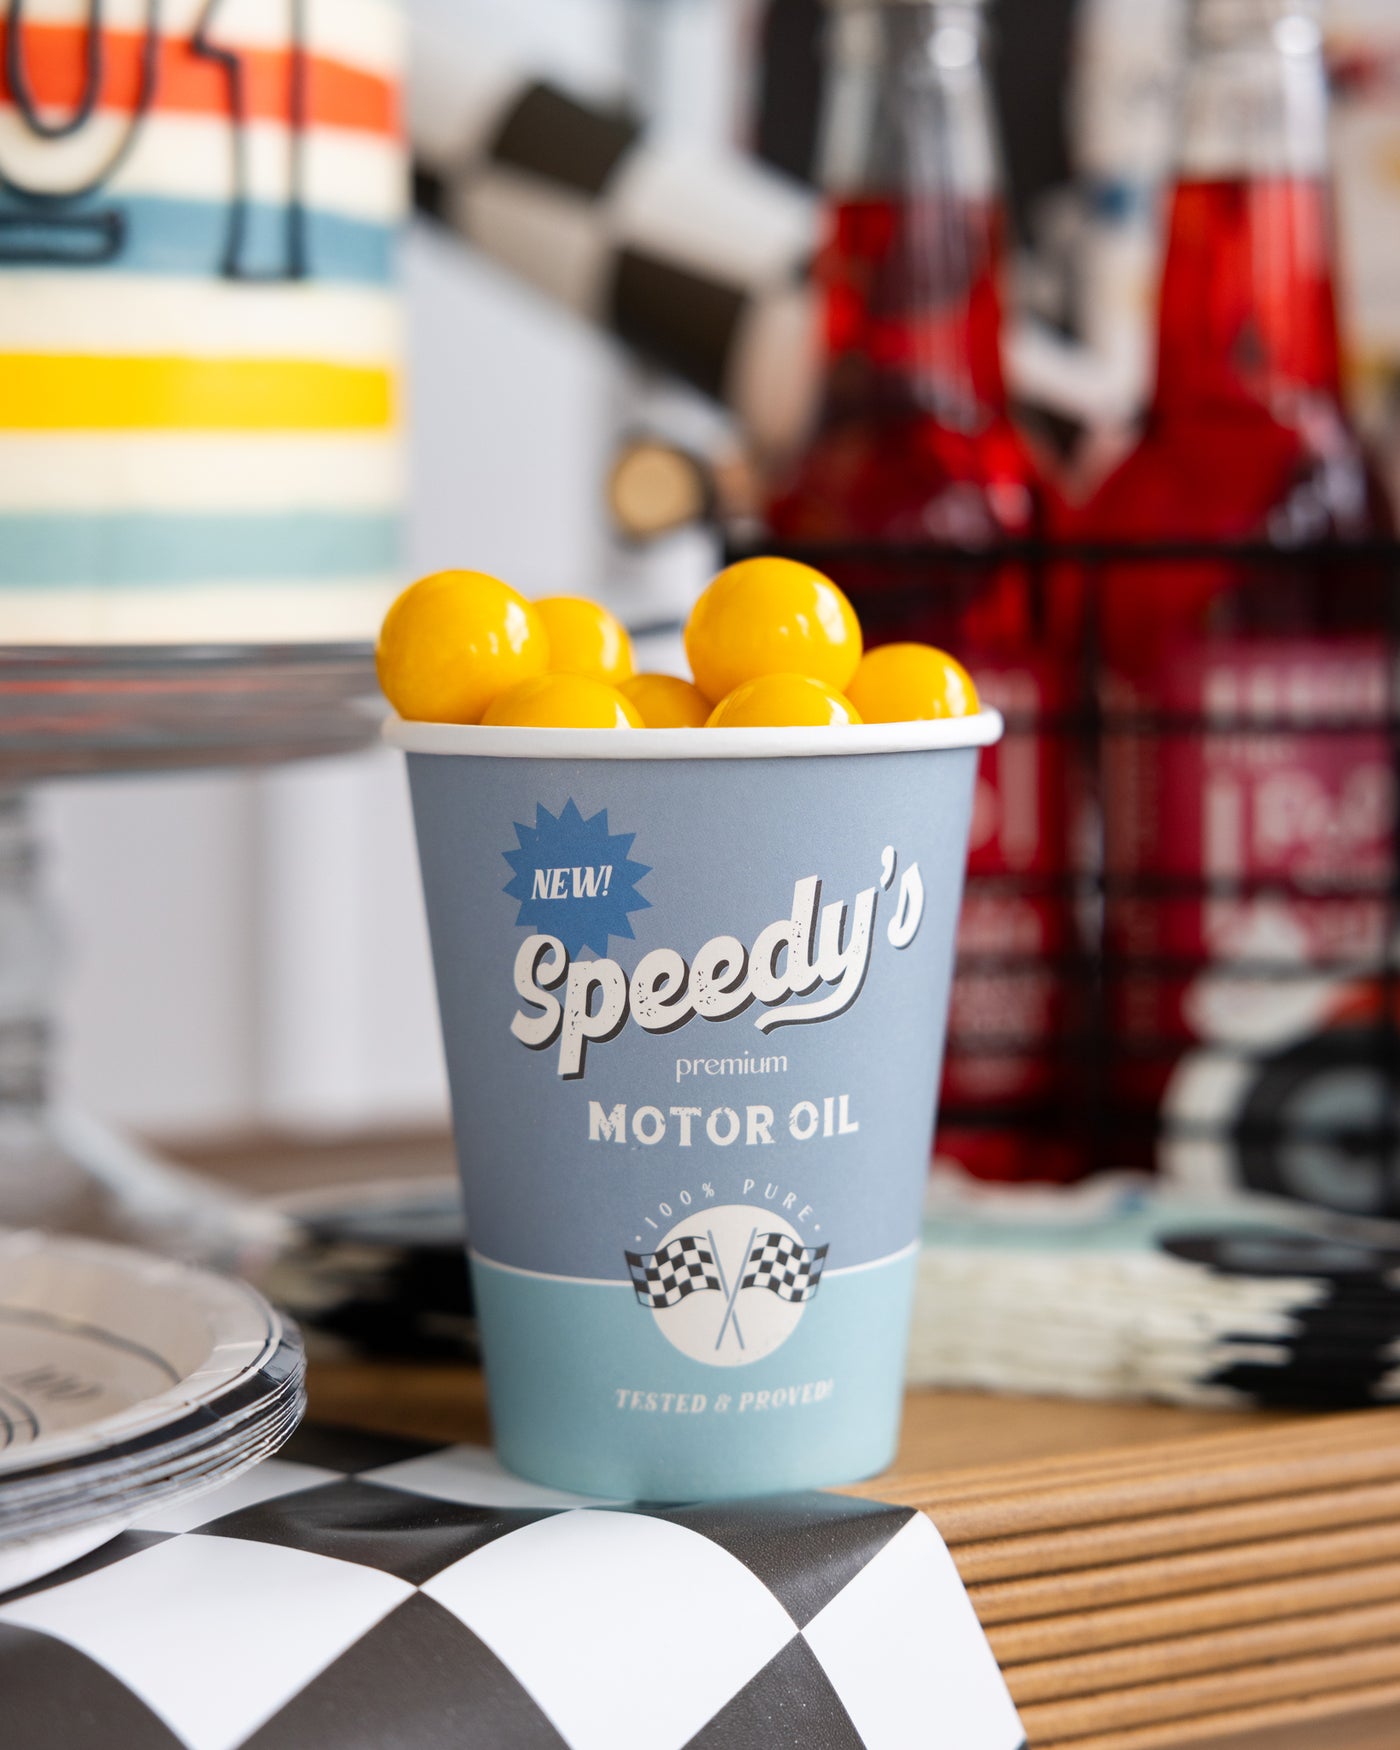 Race car-themed party food including motor oil cups and checkered sandwiches